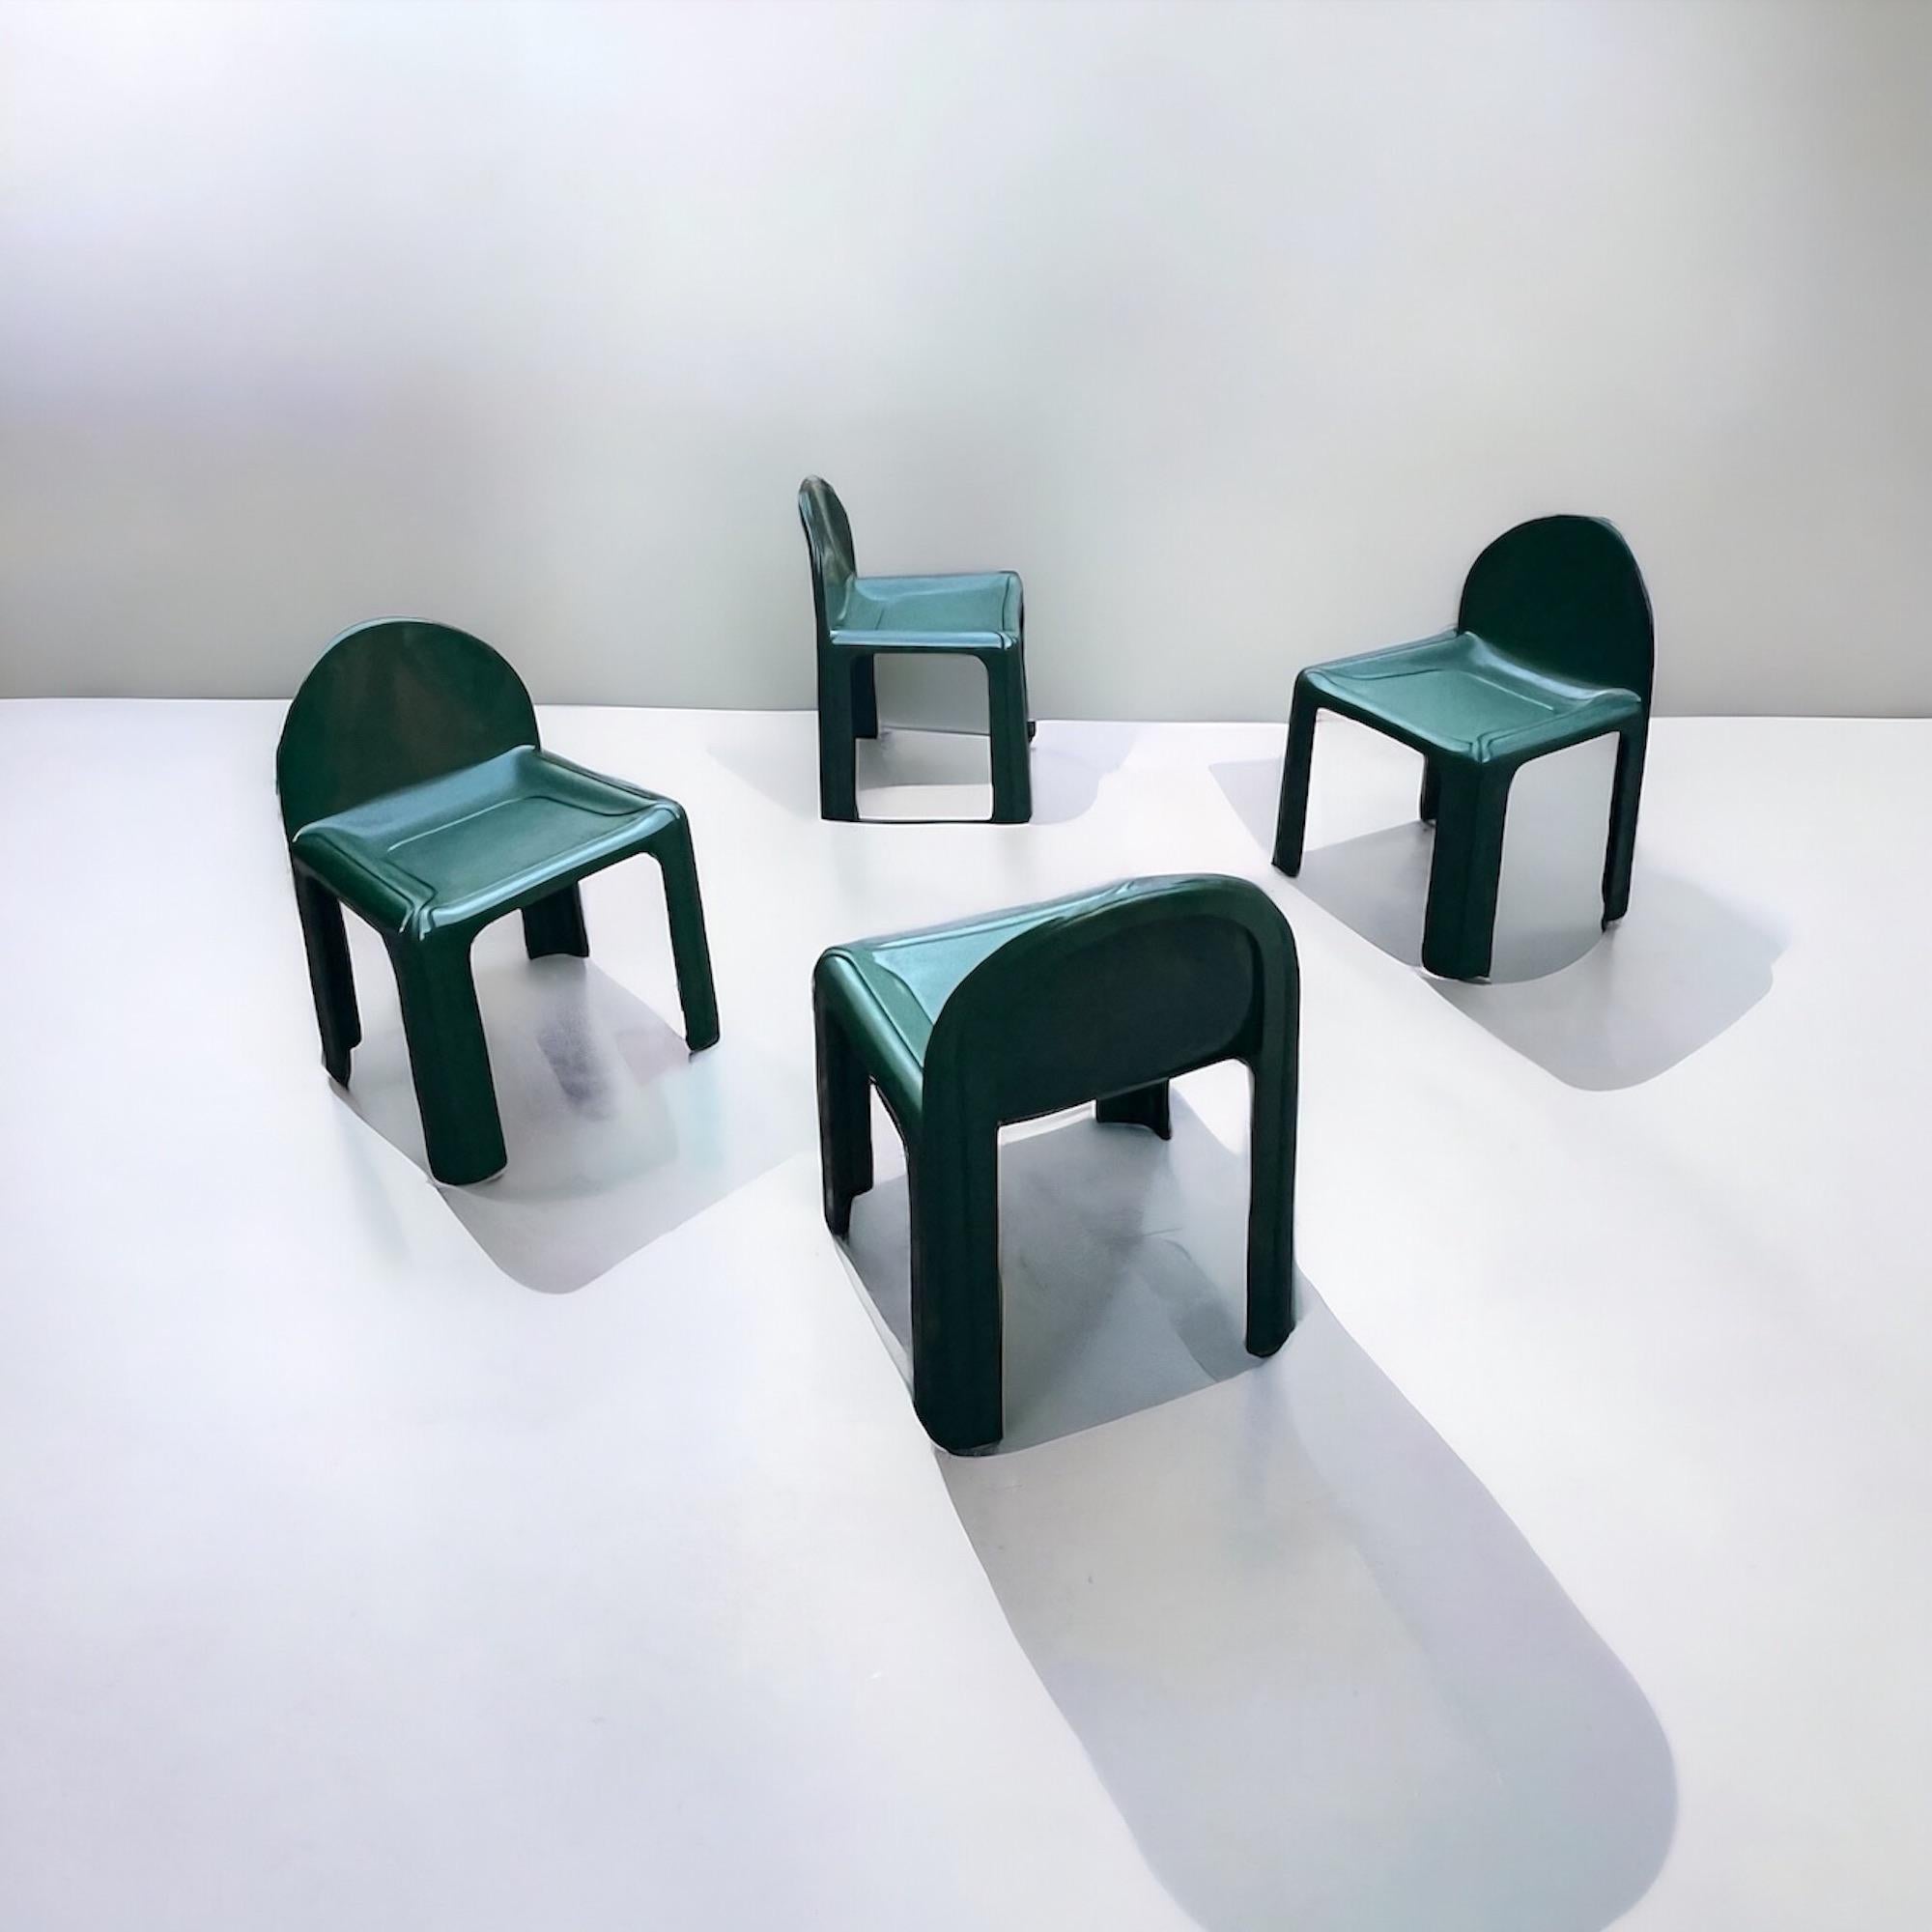 Kartell Model 4854 Chairs by Gae Aulenti, 1960s - Set of 4 - Emerald Green Resin For Sale 4